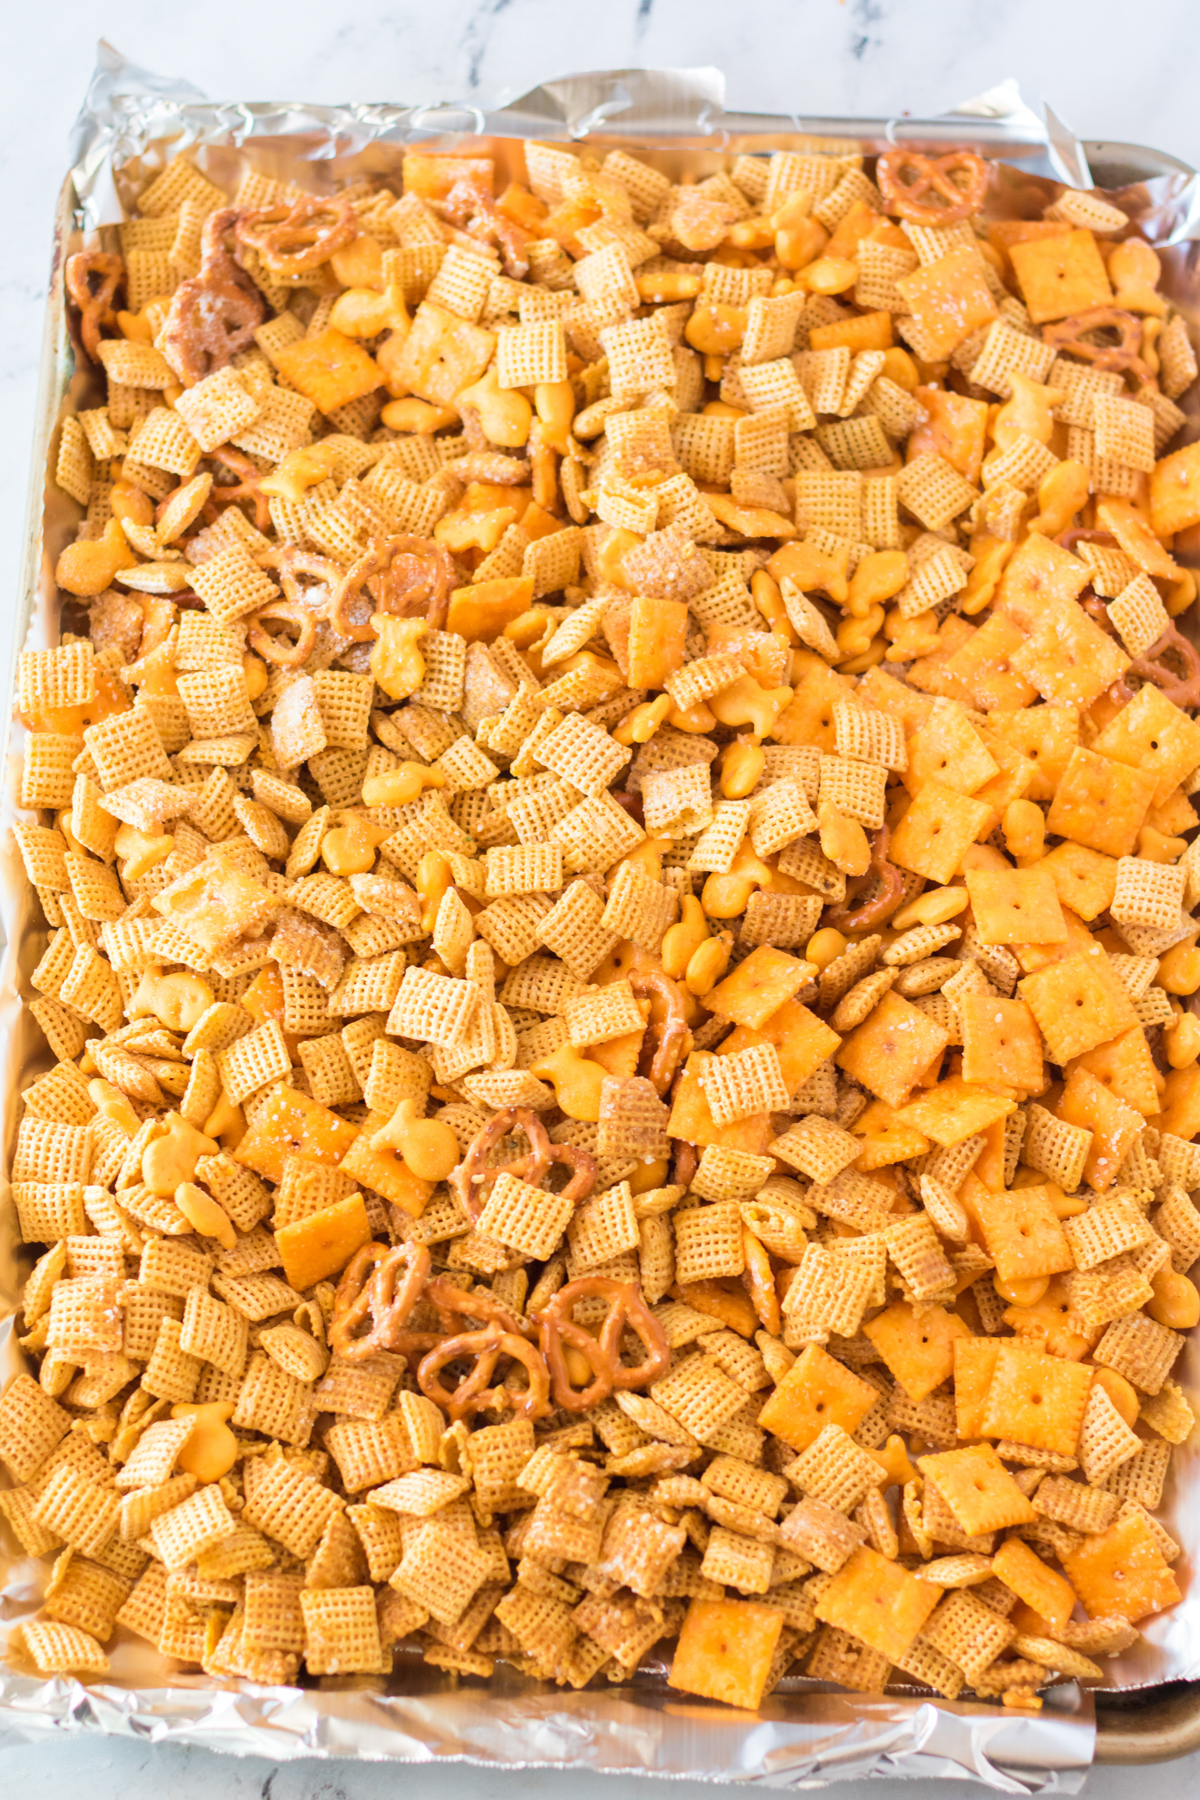 unbaked cheddar chex mix ready to be baked